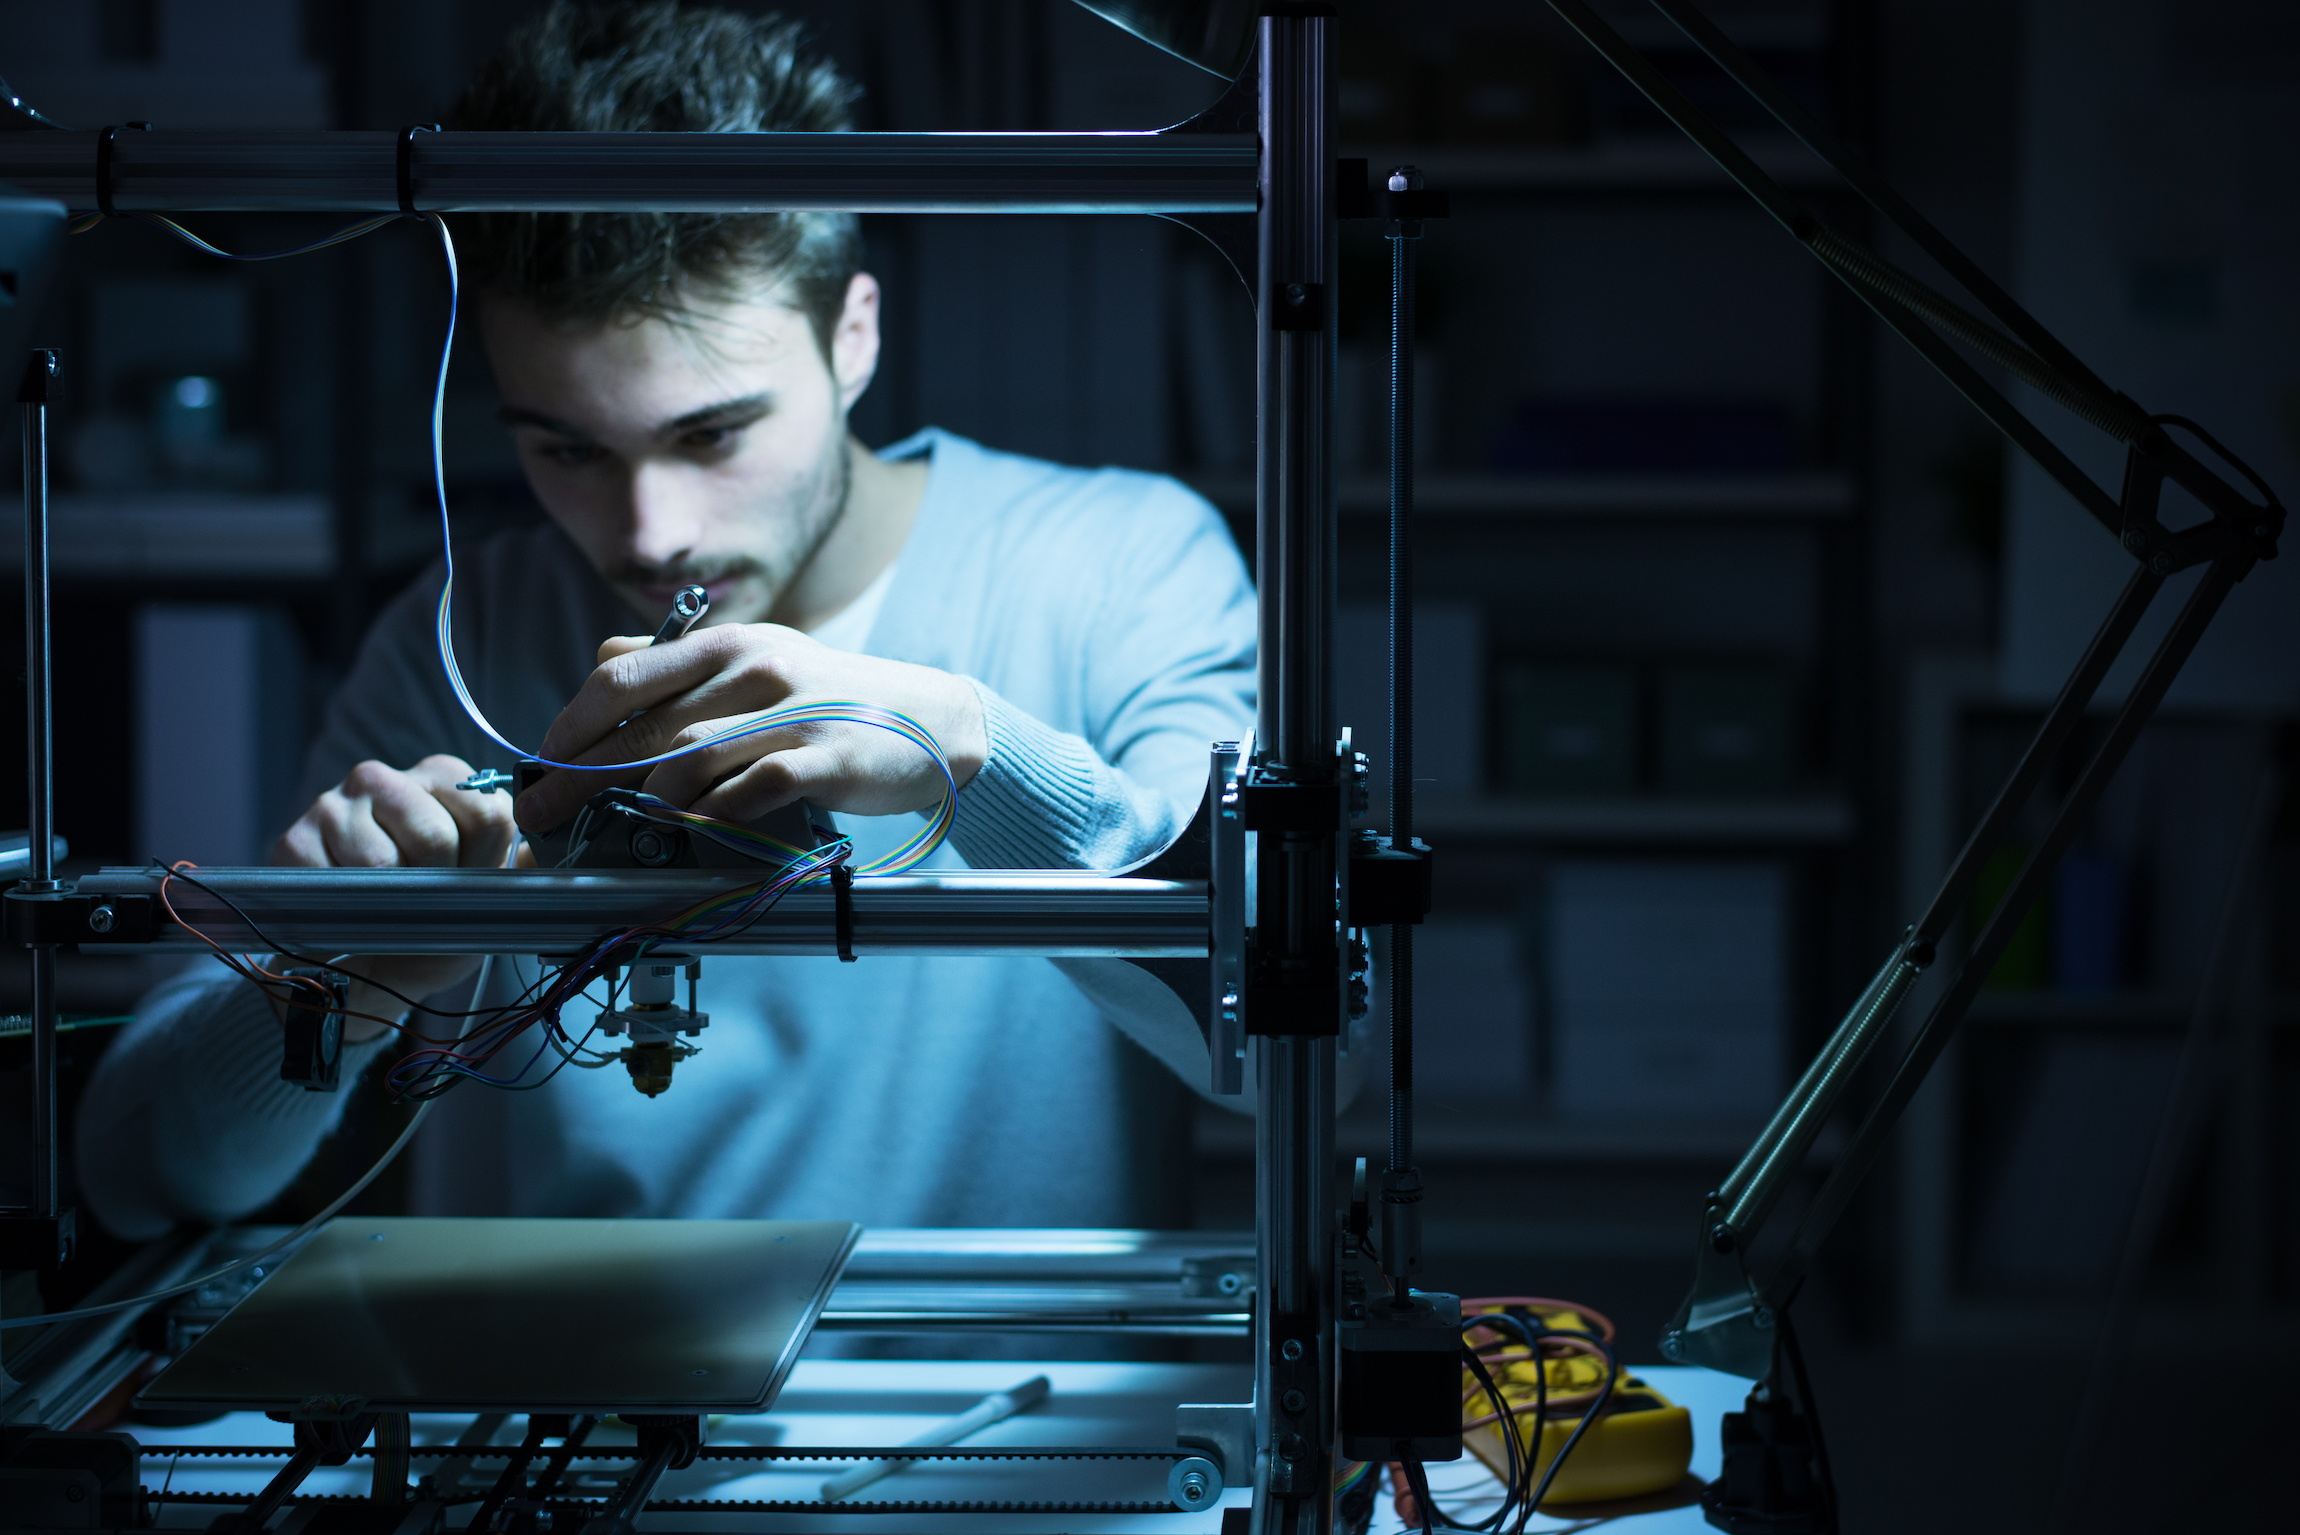 Young engineer working at night in the lab, he is adjusting a 3D printer's components, technology and engineering concept